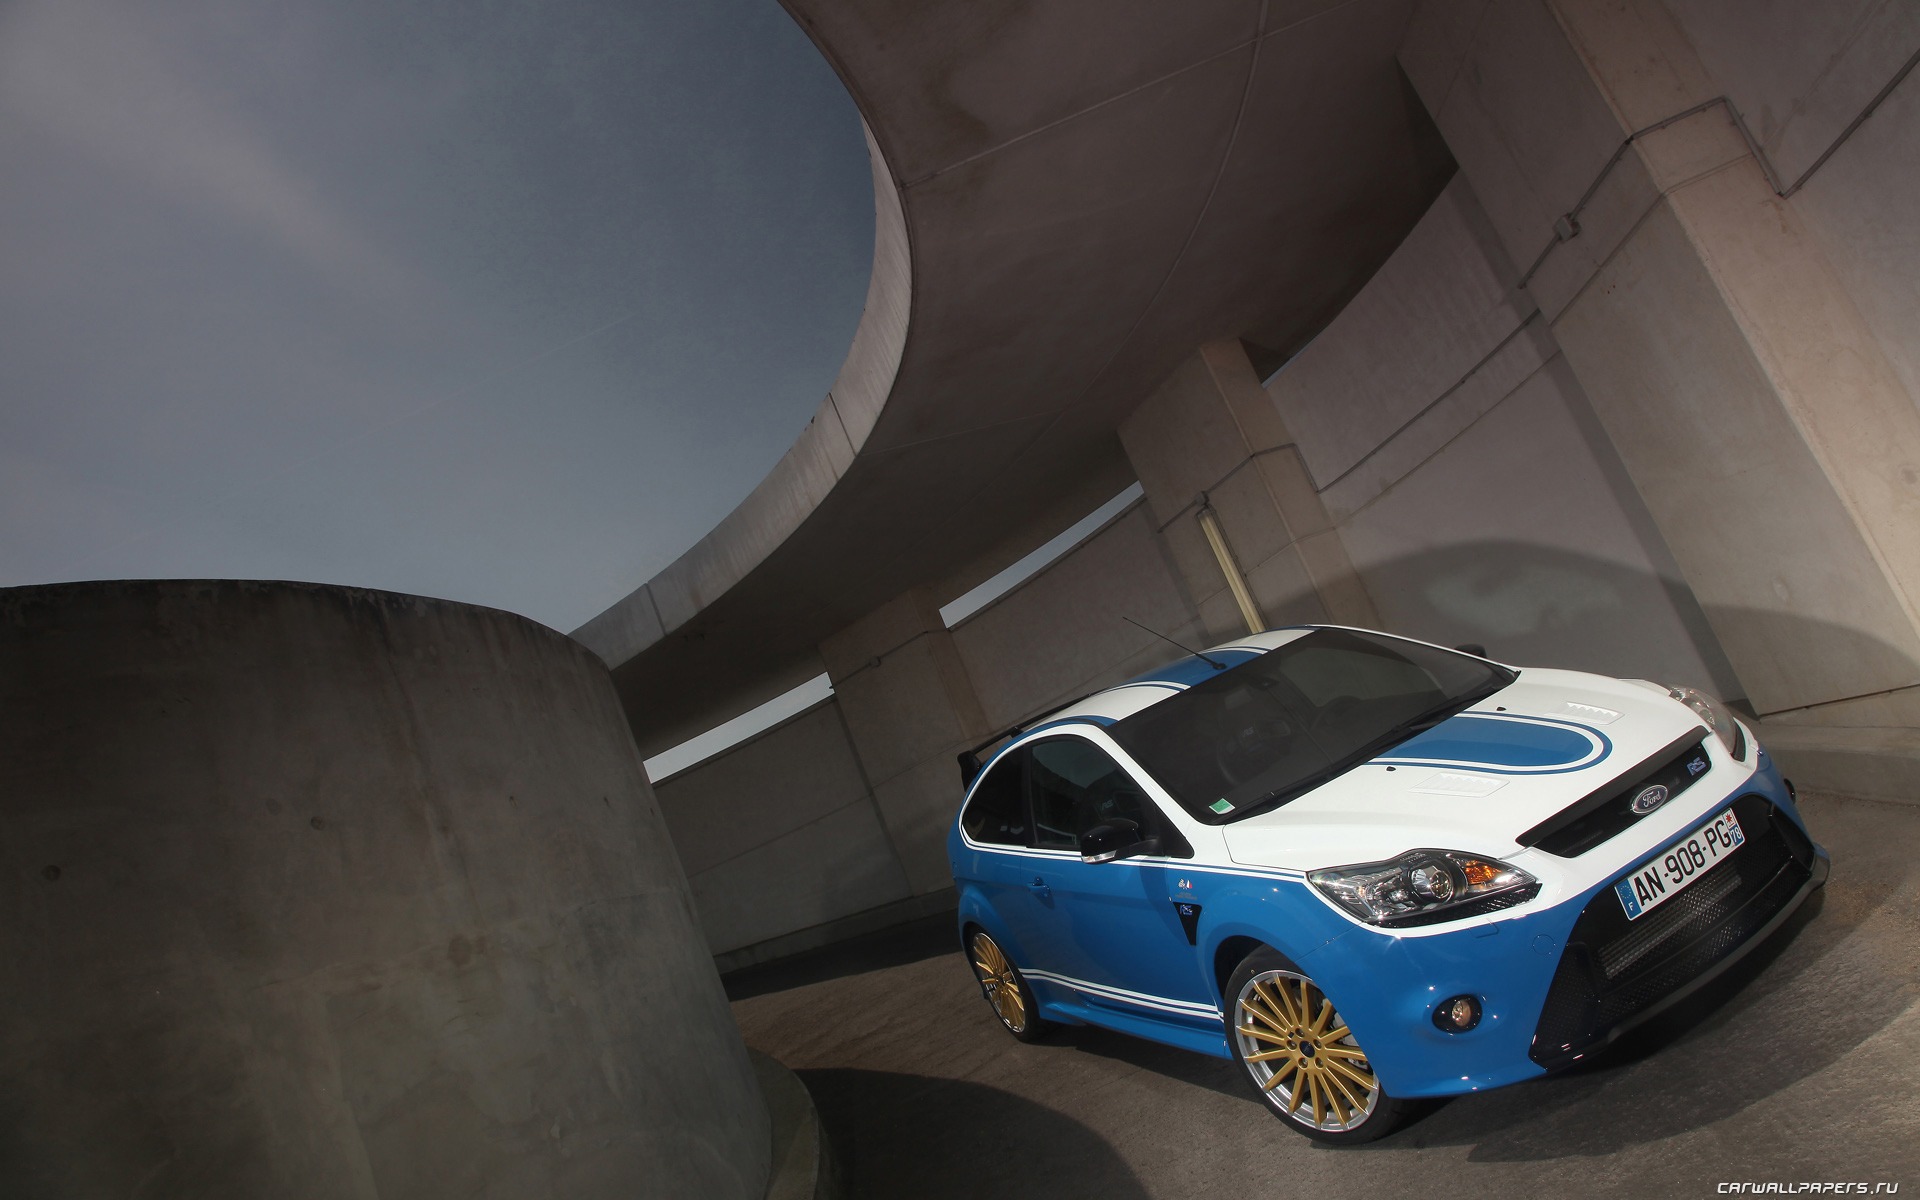 Ford Focus RS Le Mans Classic - 2010 HD Wallpaper #4 - 1920x1200